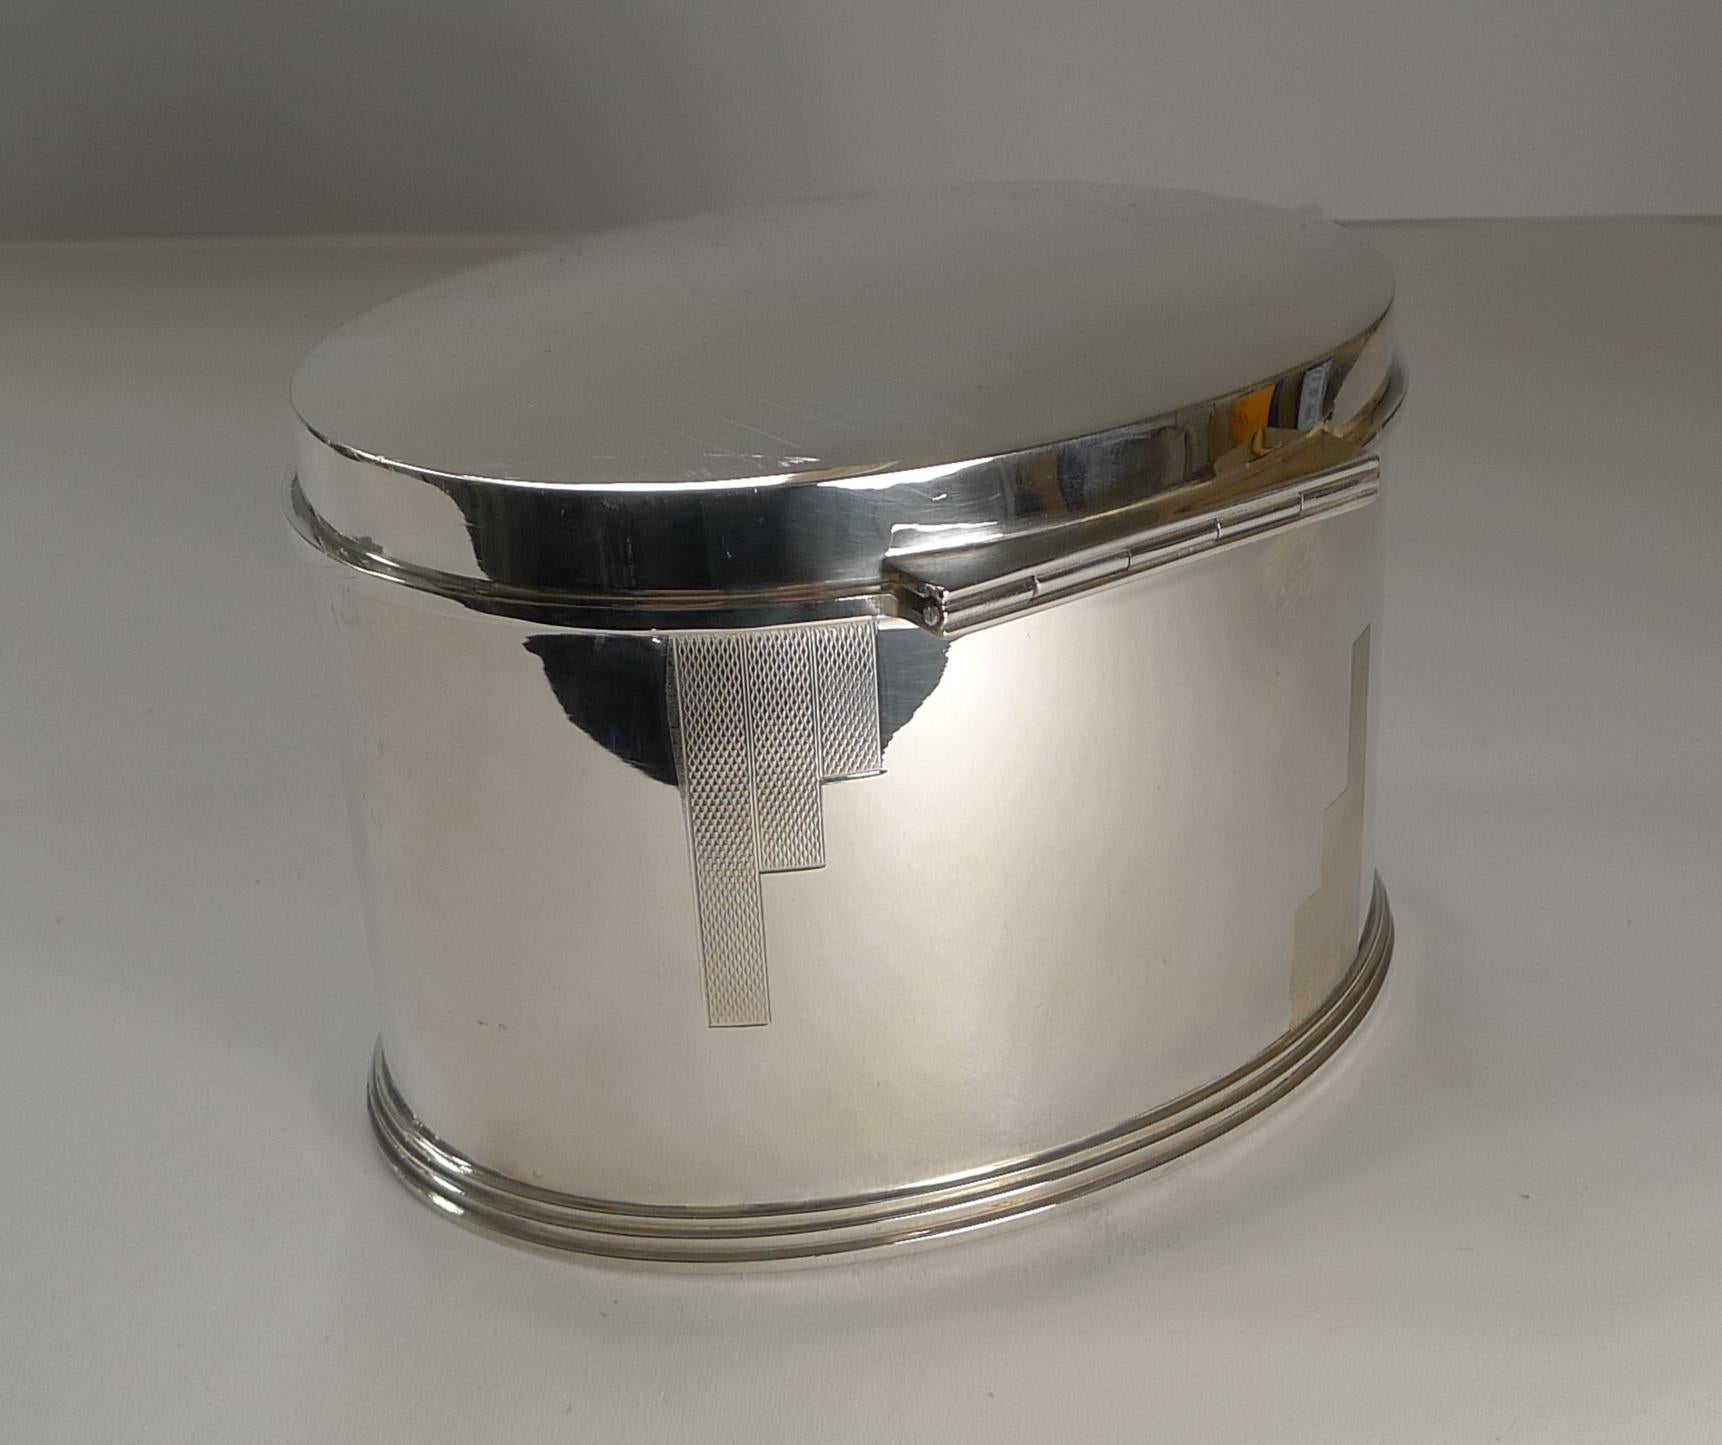 Early 20th Century Art Deco Silver Plated Biscuit Box by Mappin and Webb, c.1925